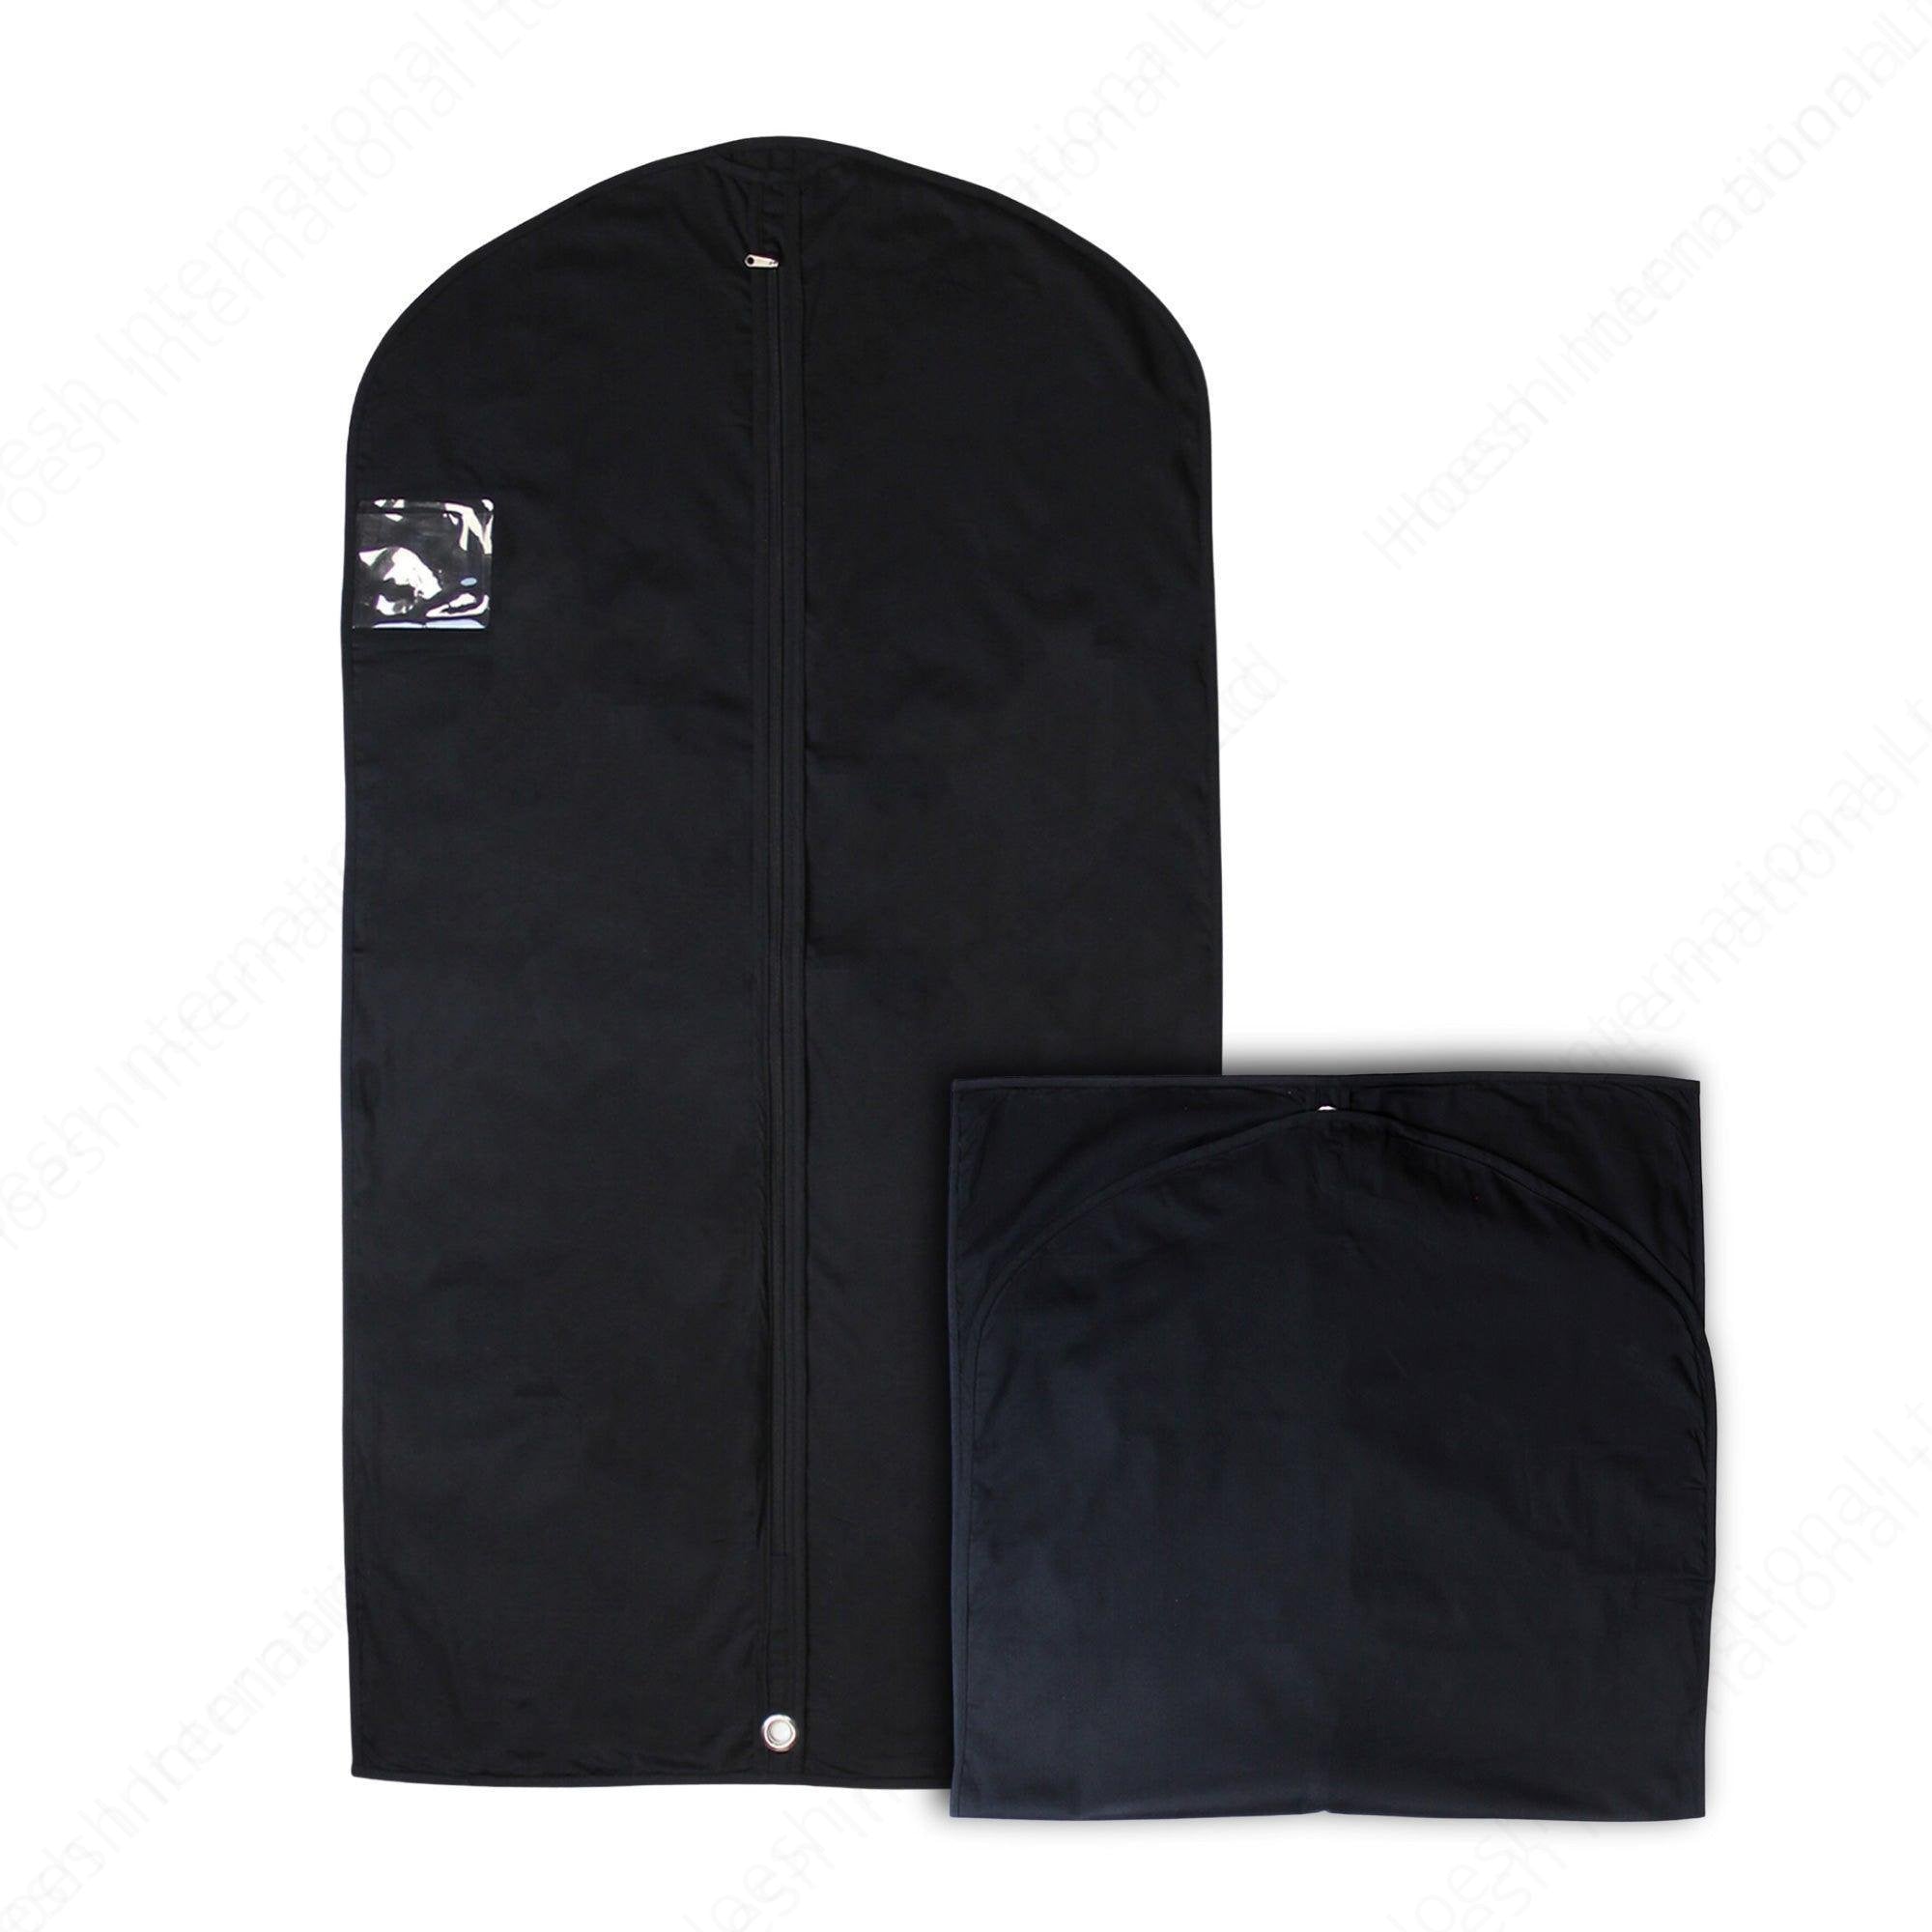 44” Finest Cotton Twill Breathable Fabric Suit Cover - Hoesh International Ltd